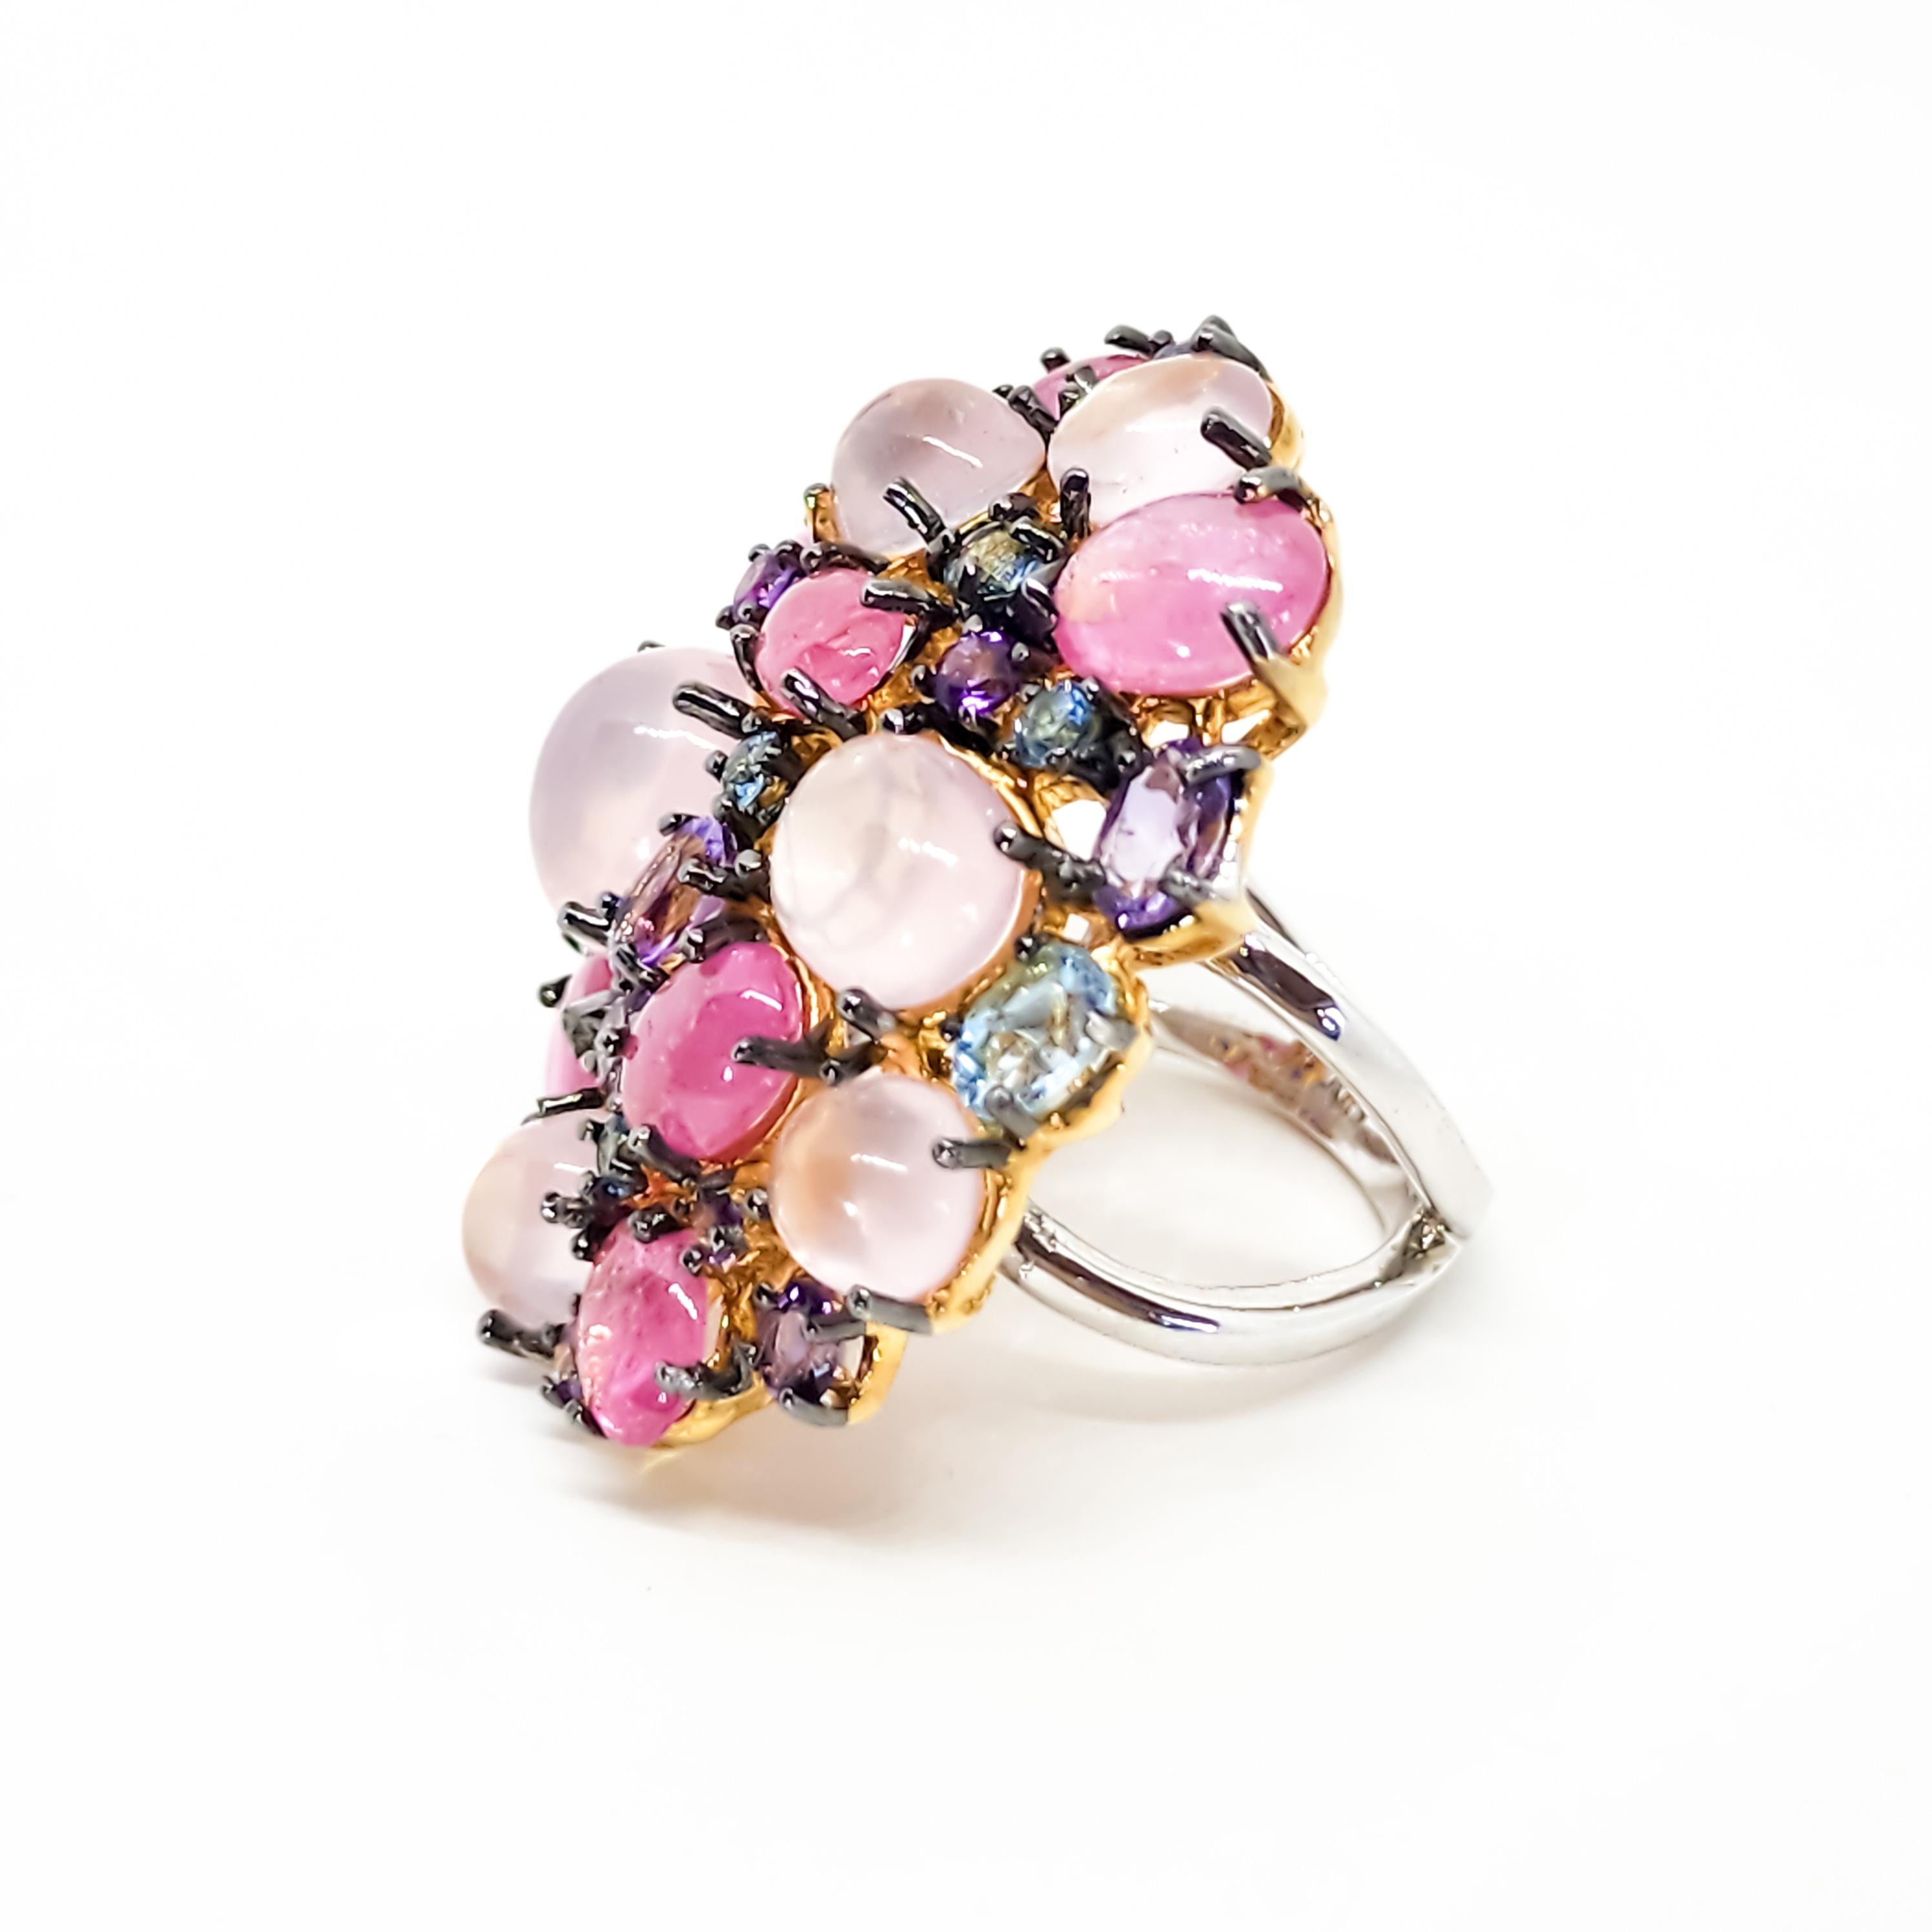 One large Cocktail, Cluster Ring featuring a Deliciously Sweet Confectionery of Colored Gemstones in Pinks, Blues and Purples. This festive Ring is an appropriate accent for all seasons wear.  The Large face of the Ring is an offset Oval of Color